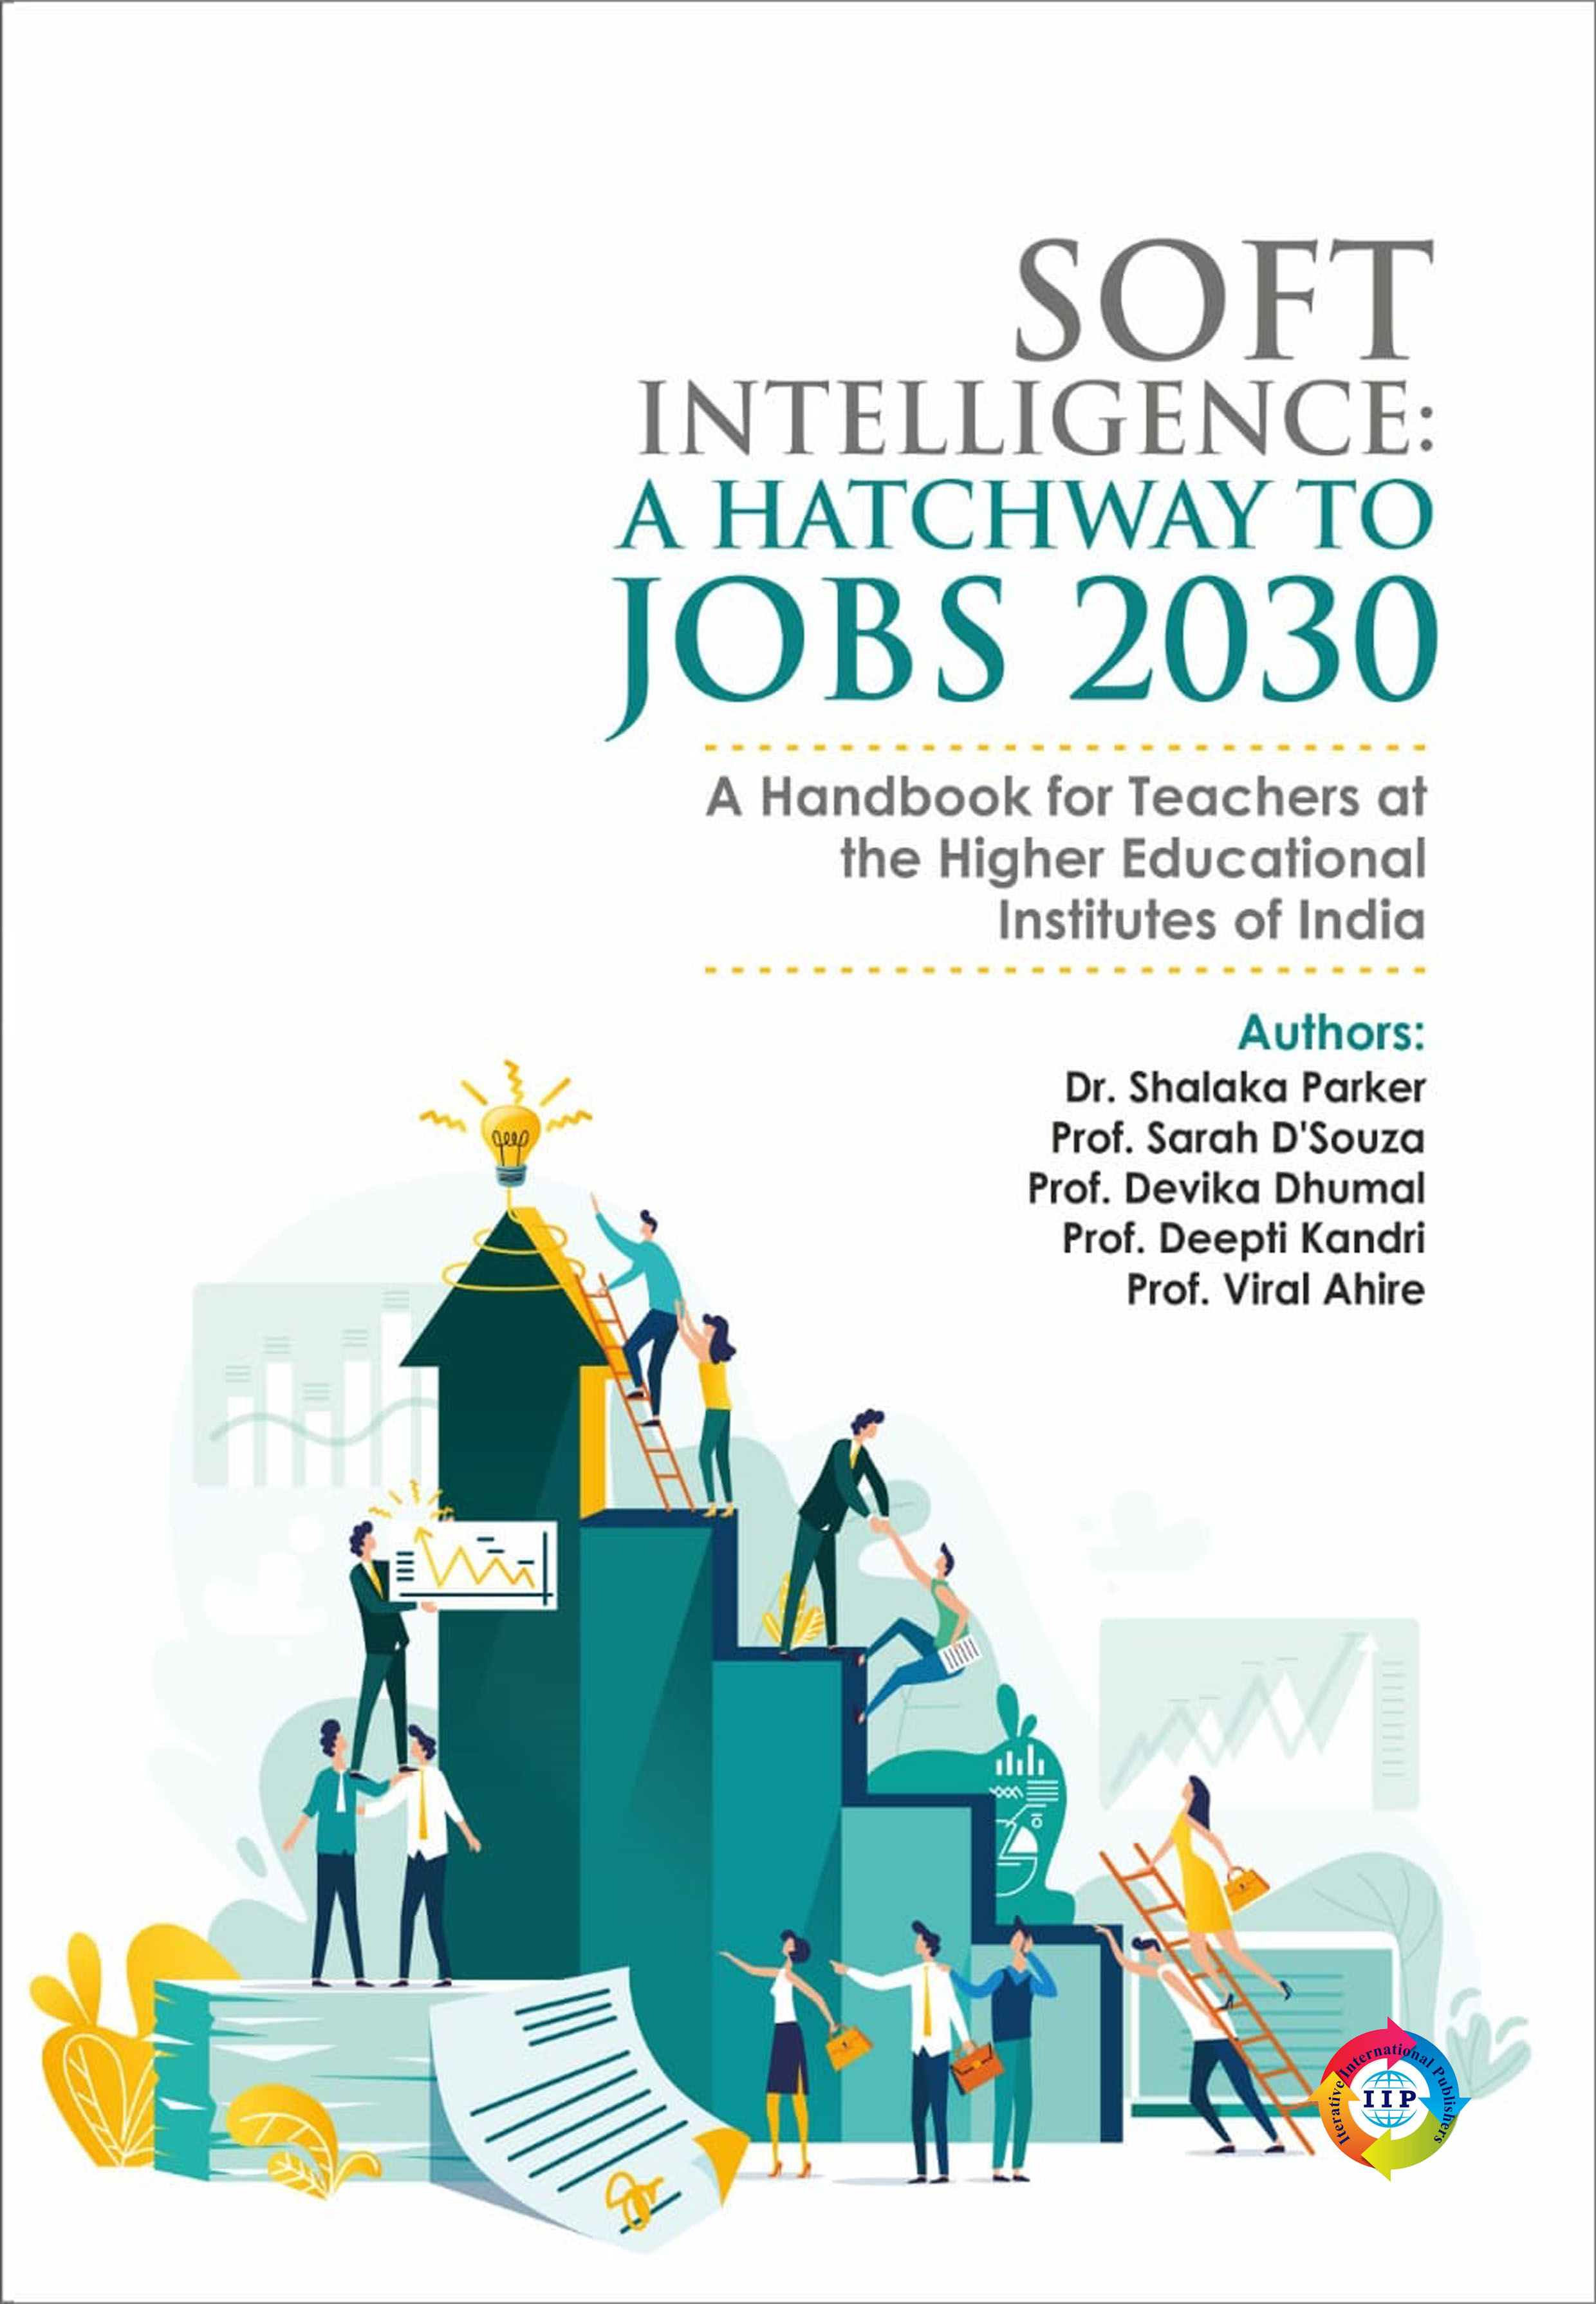 SOFT INTELLIGENCE: A HATCHWAY TO JOBS 2030